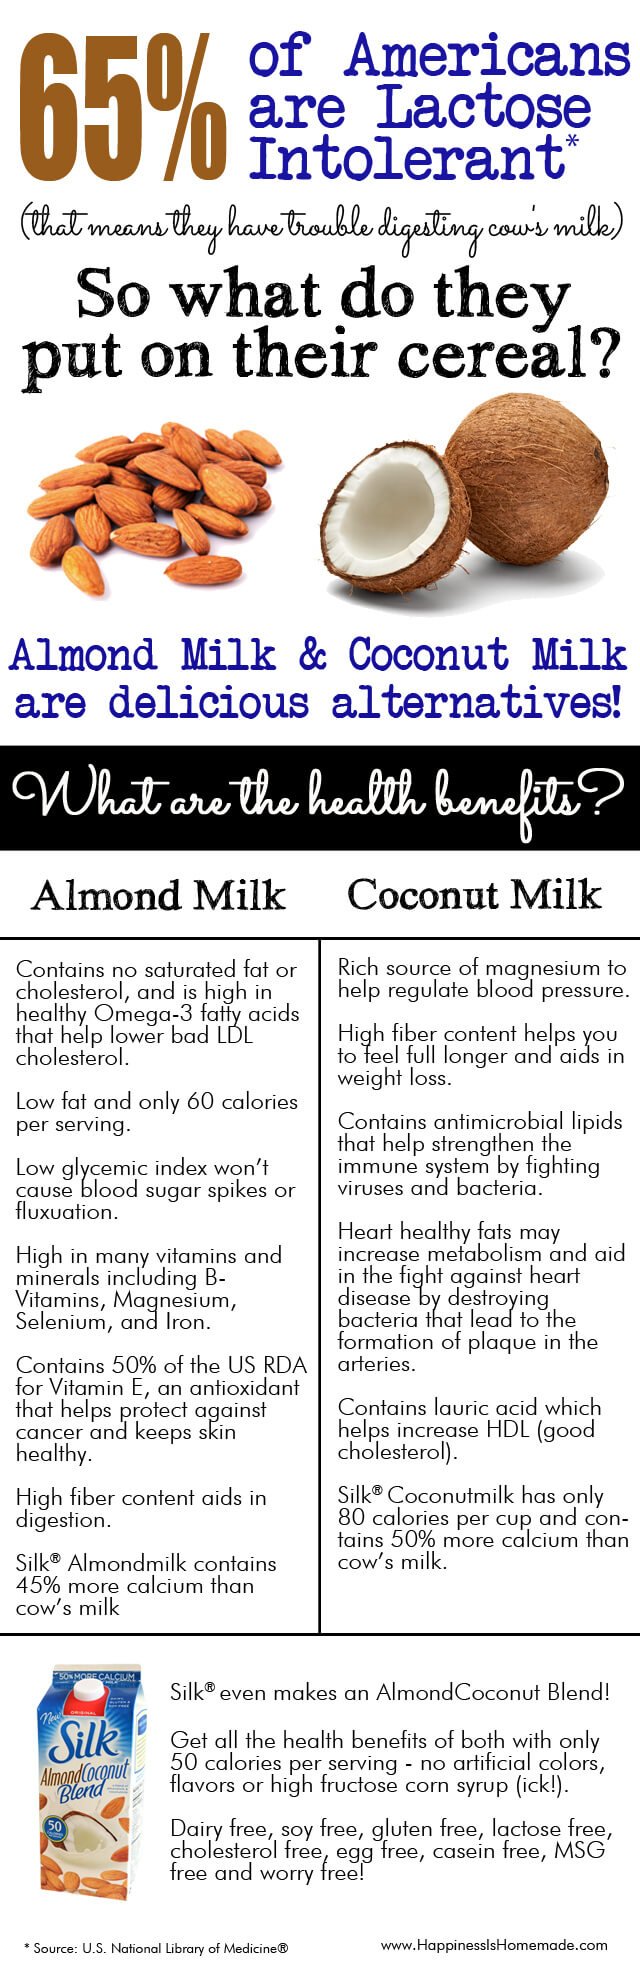 The Health Benefits of Almond and Coconut Milk